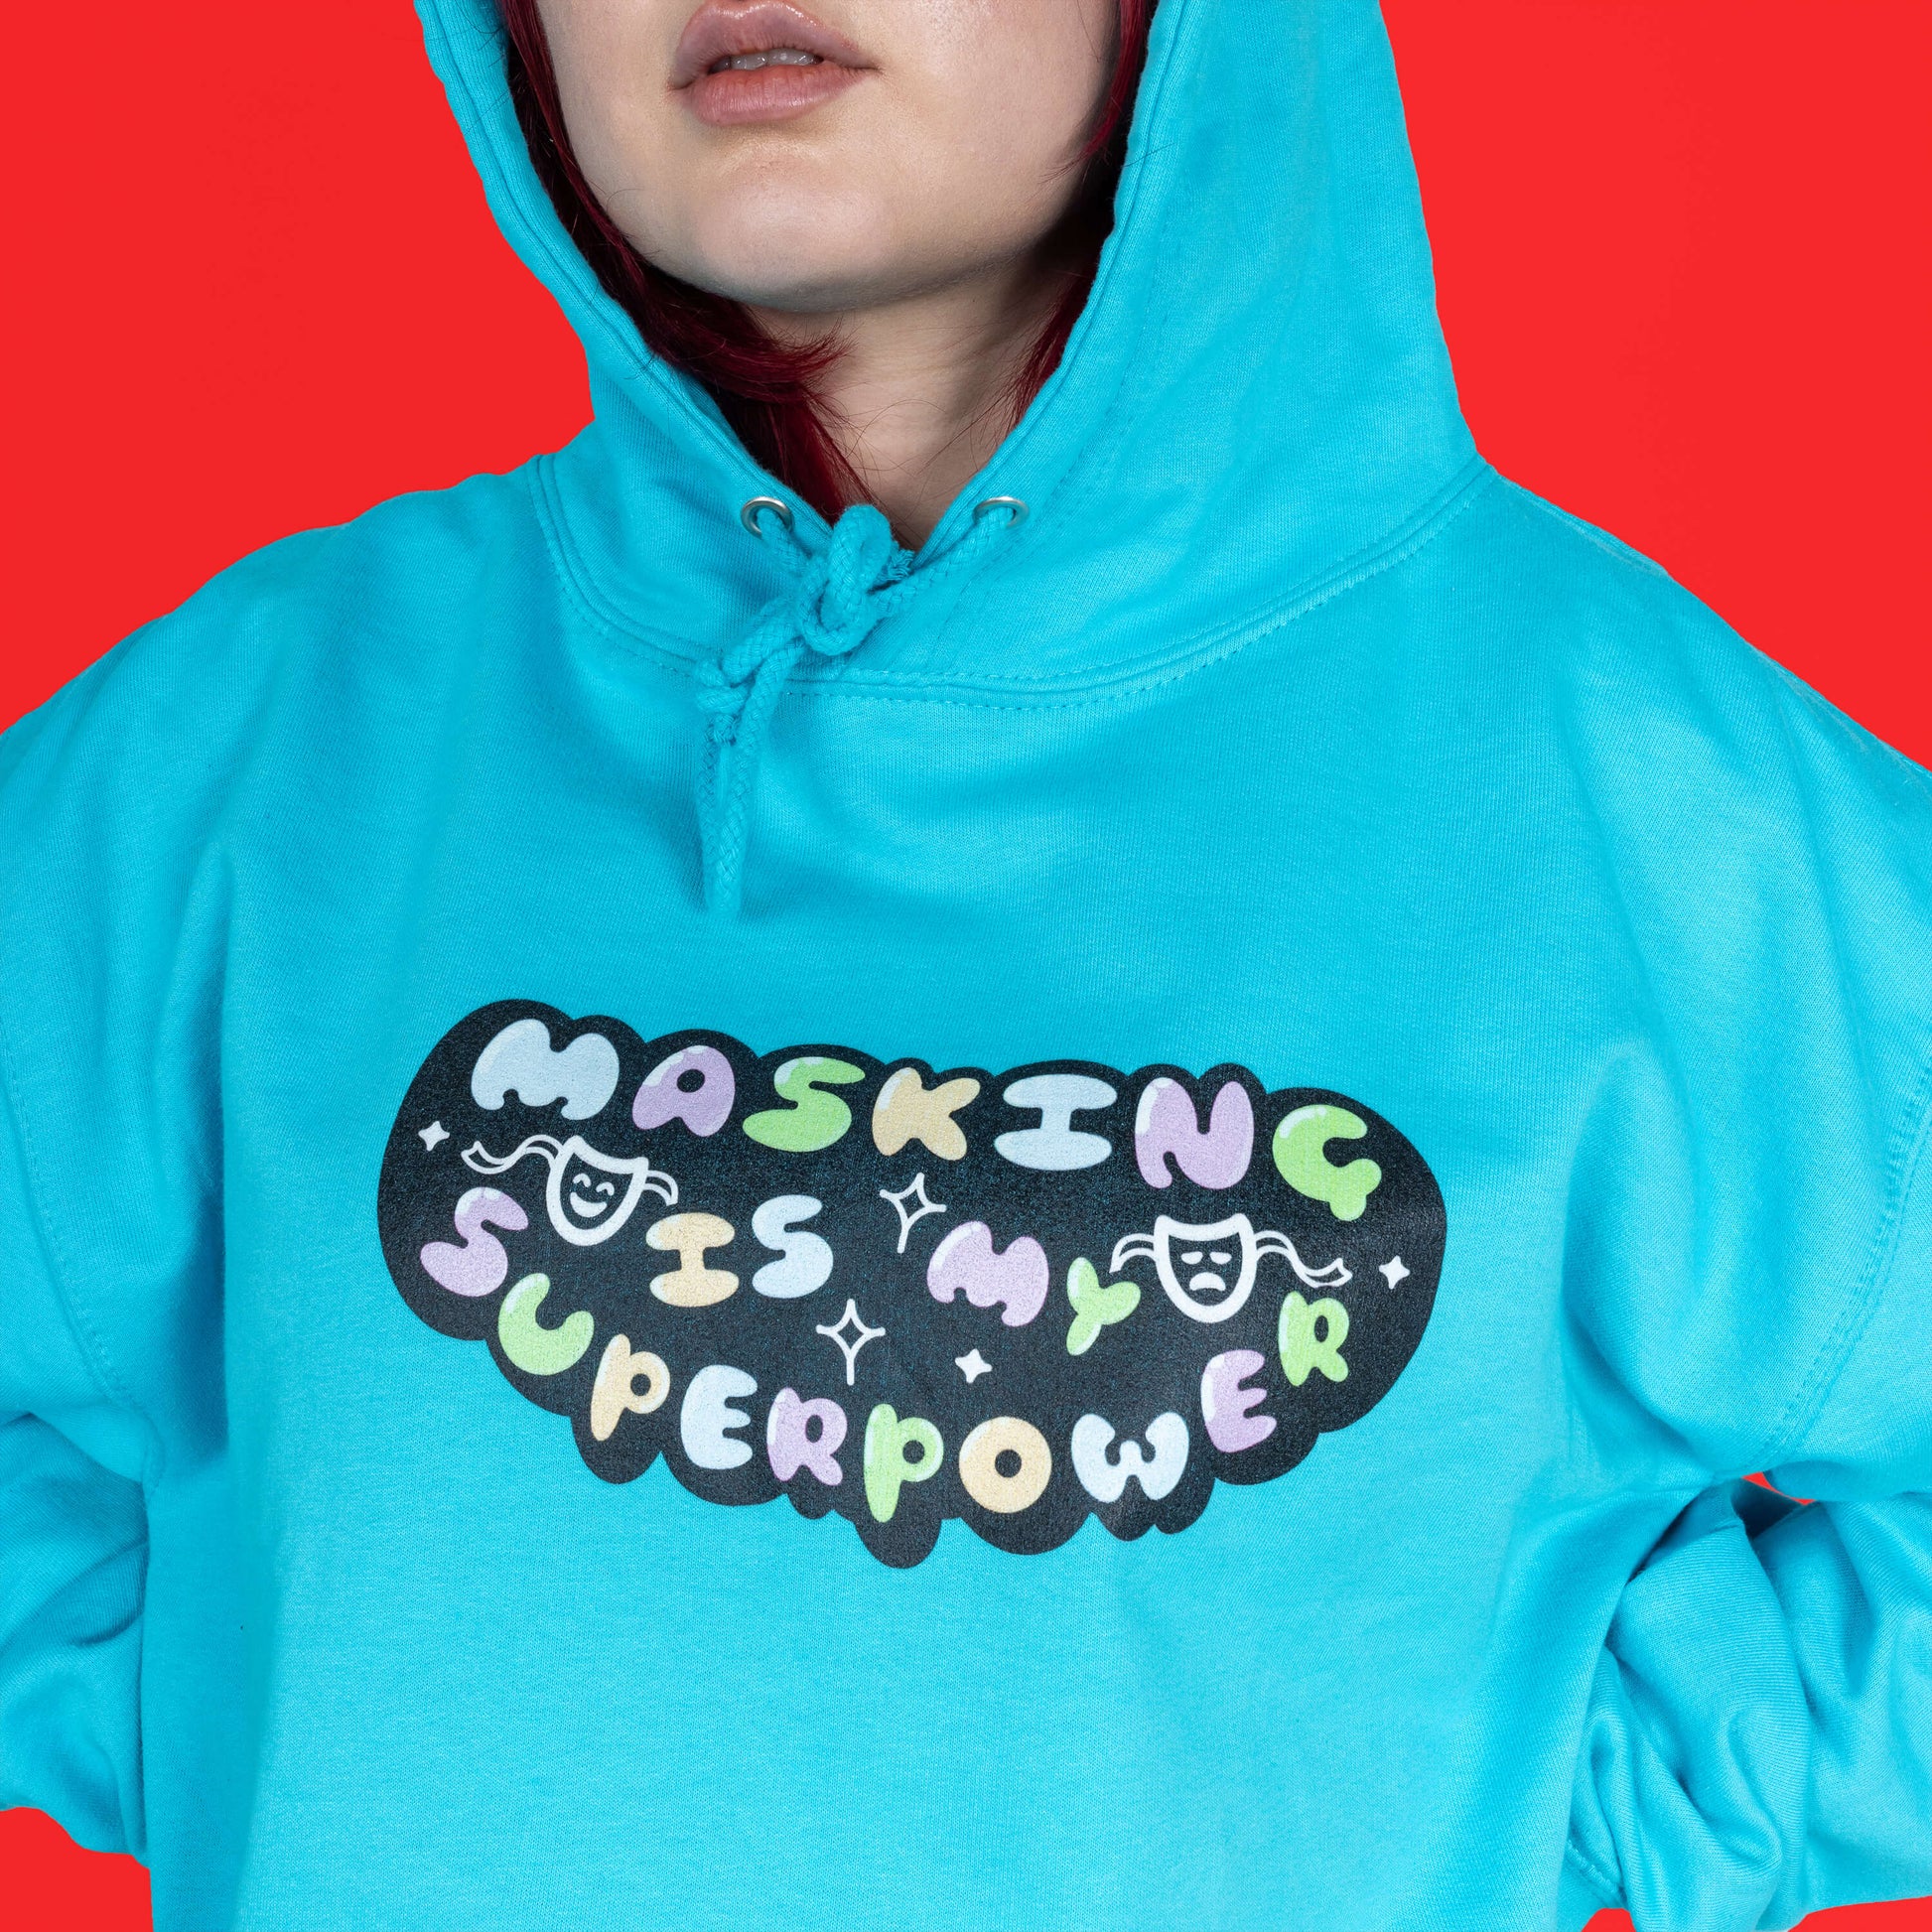 The Masking Is My Super Power Hoodie in Turquoise Surf modelled by Flo with red hair on a red background. She is facing forward  with a close up of the hood up and front print. The aqua blue hoodie features pastel rainbow bubble writing that reads 'masking is my superpower' with white sparkles, a happy and sad drama masks all on a black oval. Raising awareness for neurodivergent people with ADHD or Autism.